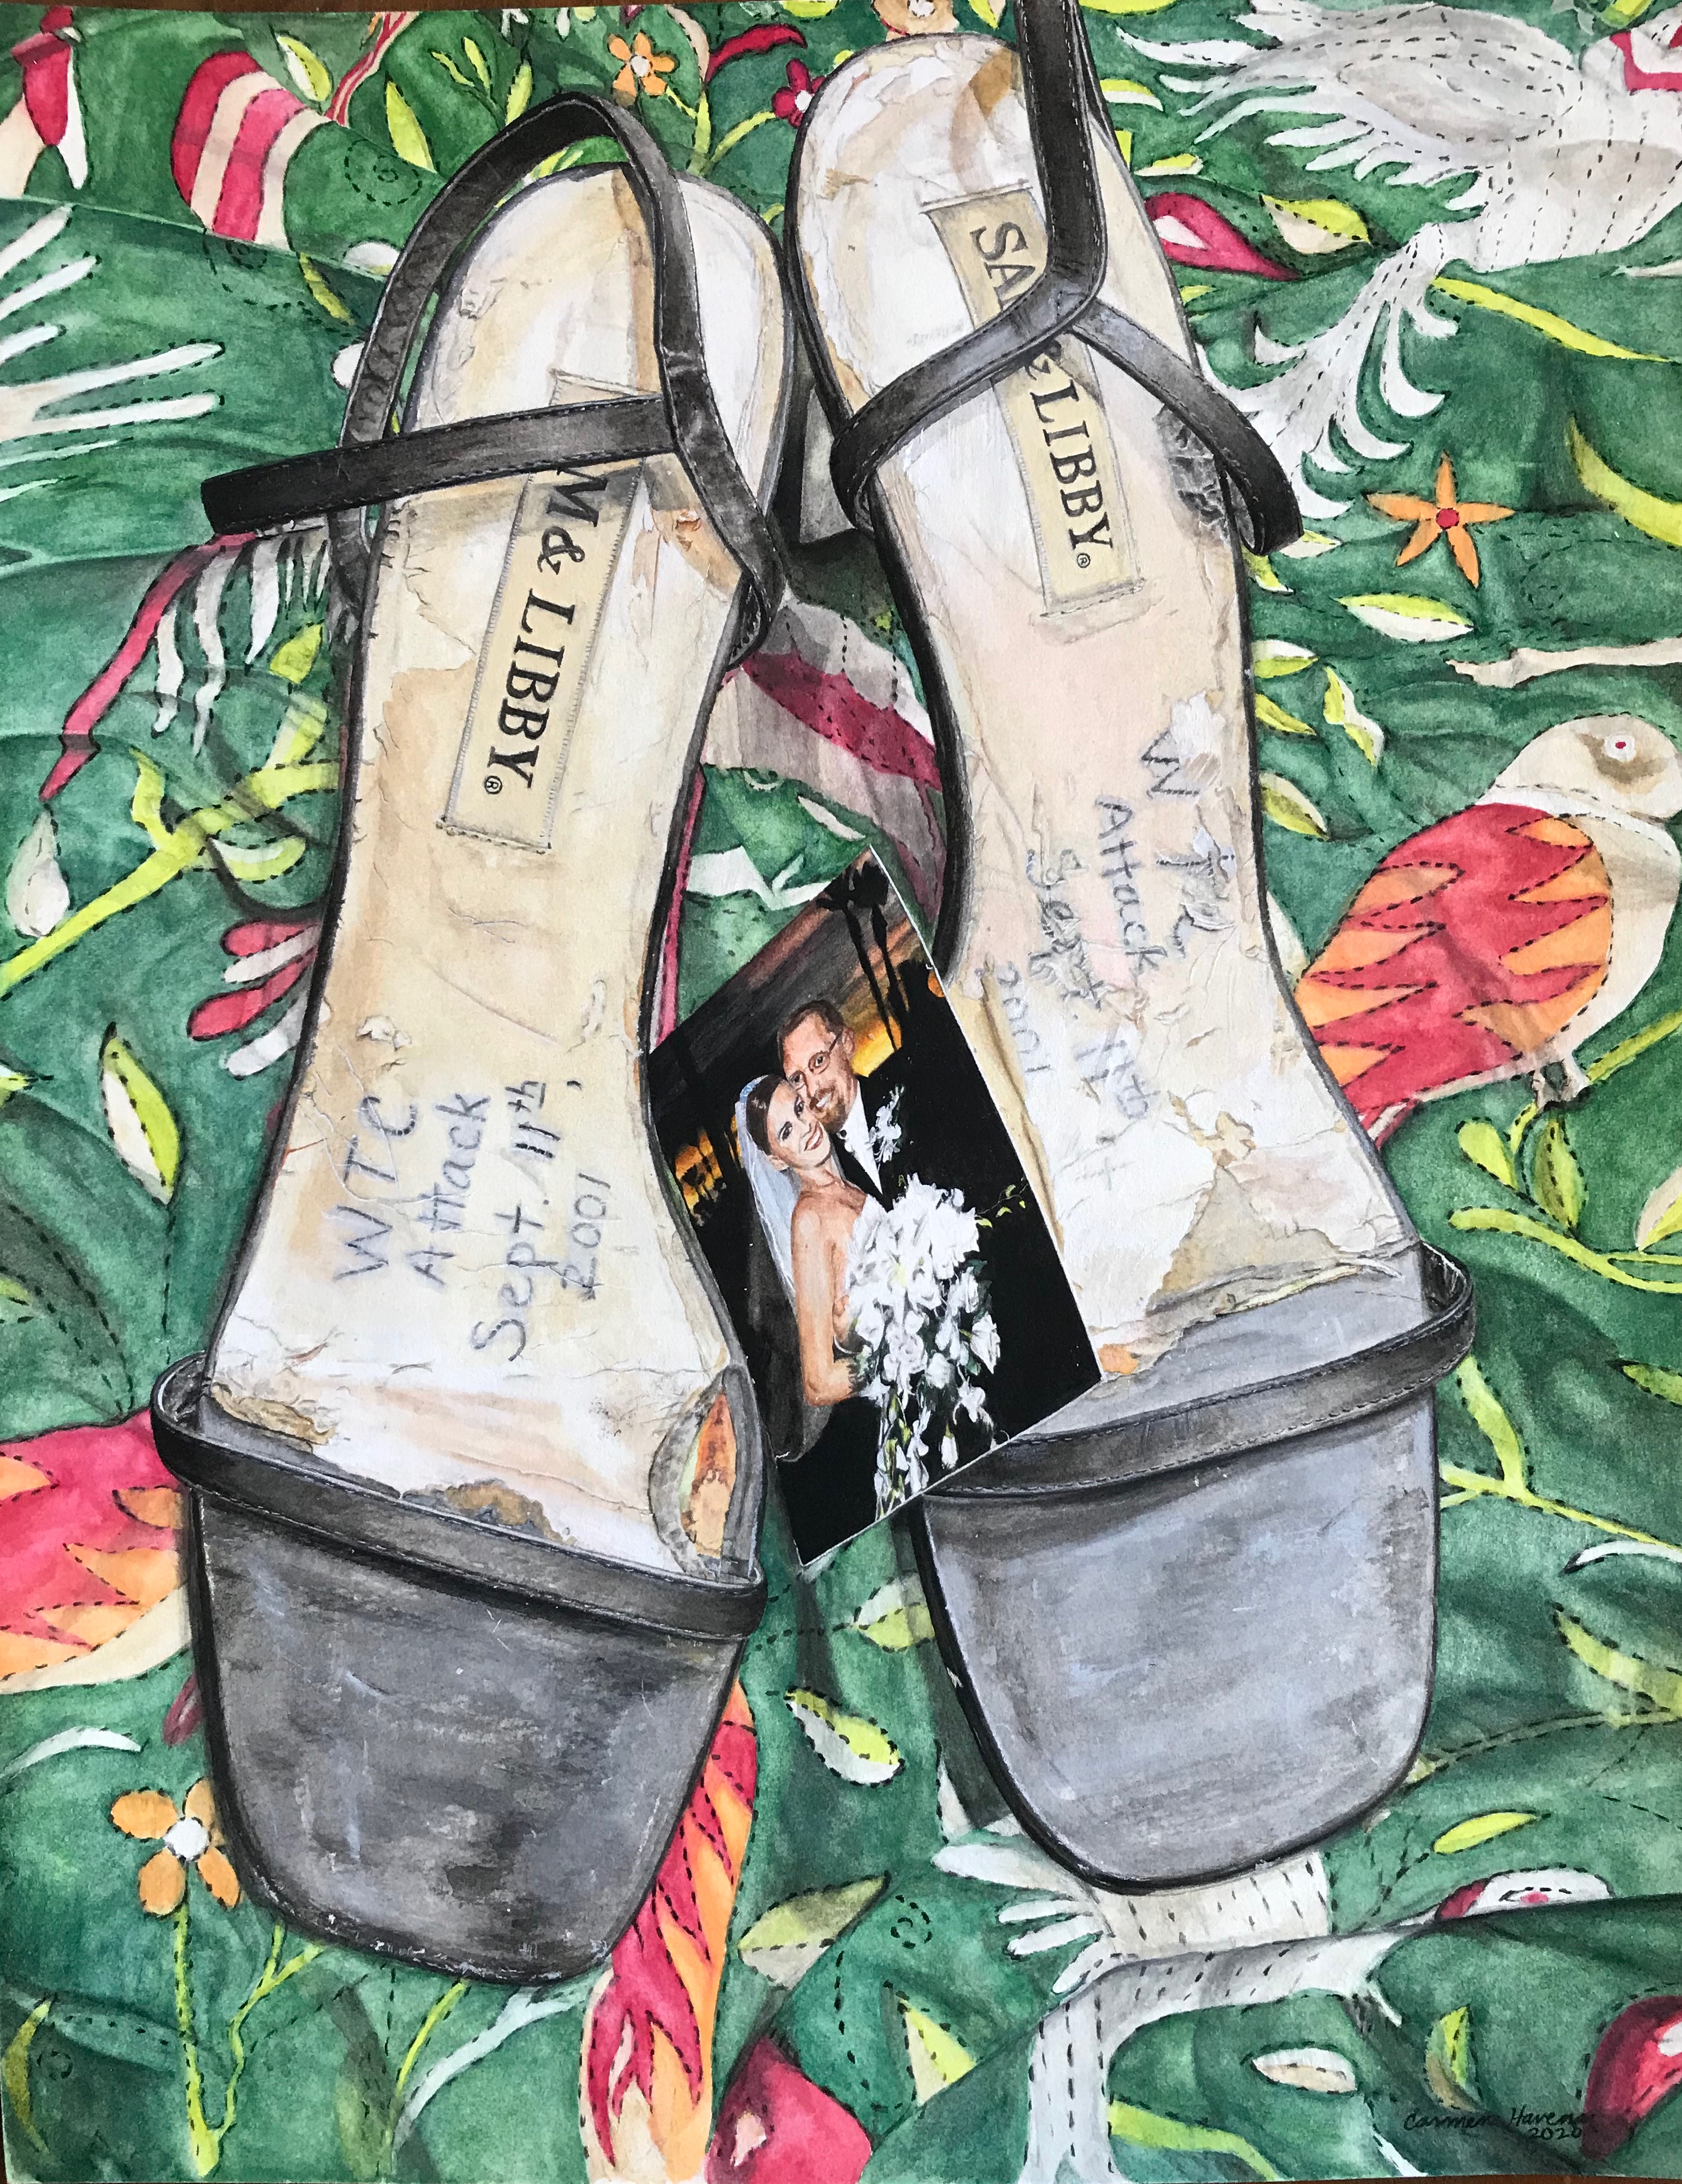 Shoes sign by artist on morning of 9/11. 